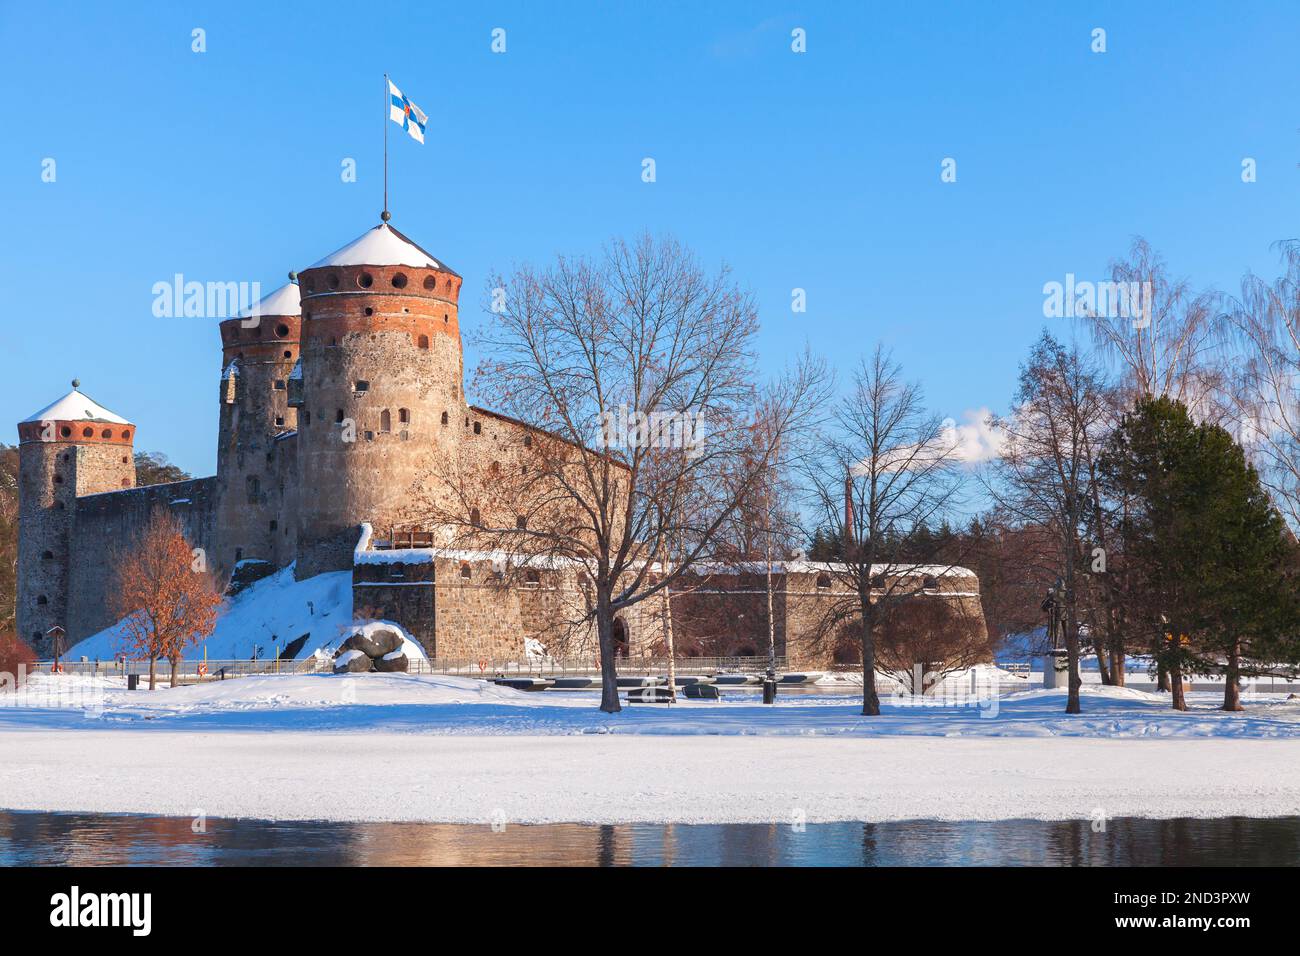 Winter landscape with Olavinlinna fortress, this is a 15th-century three-tower castle located in Savonlinna, Finland Stock Photo